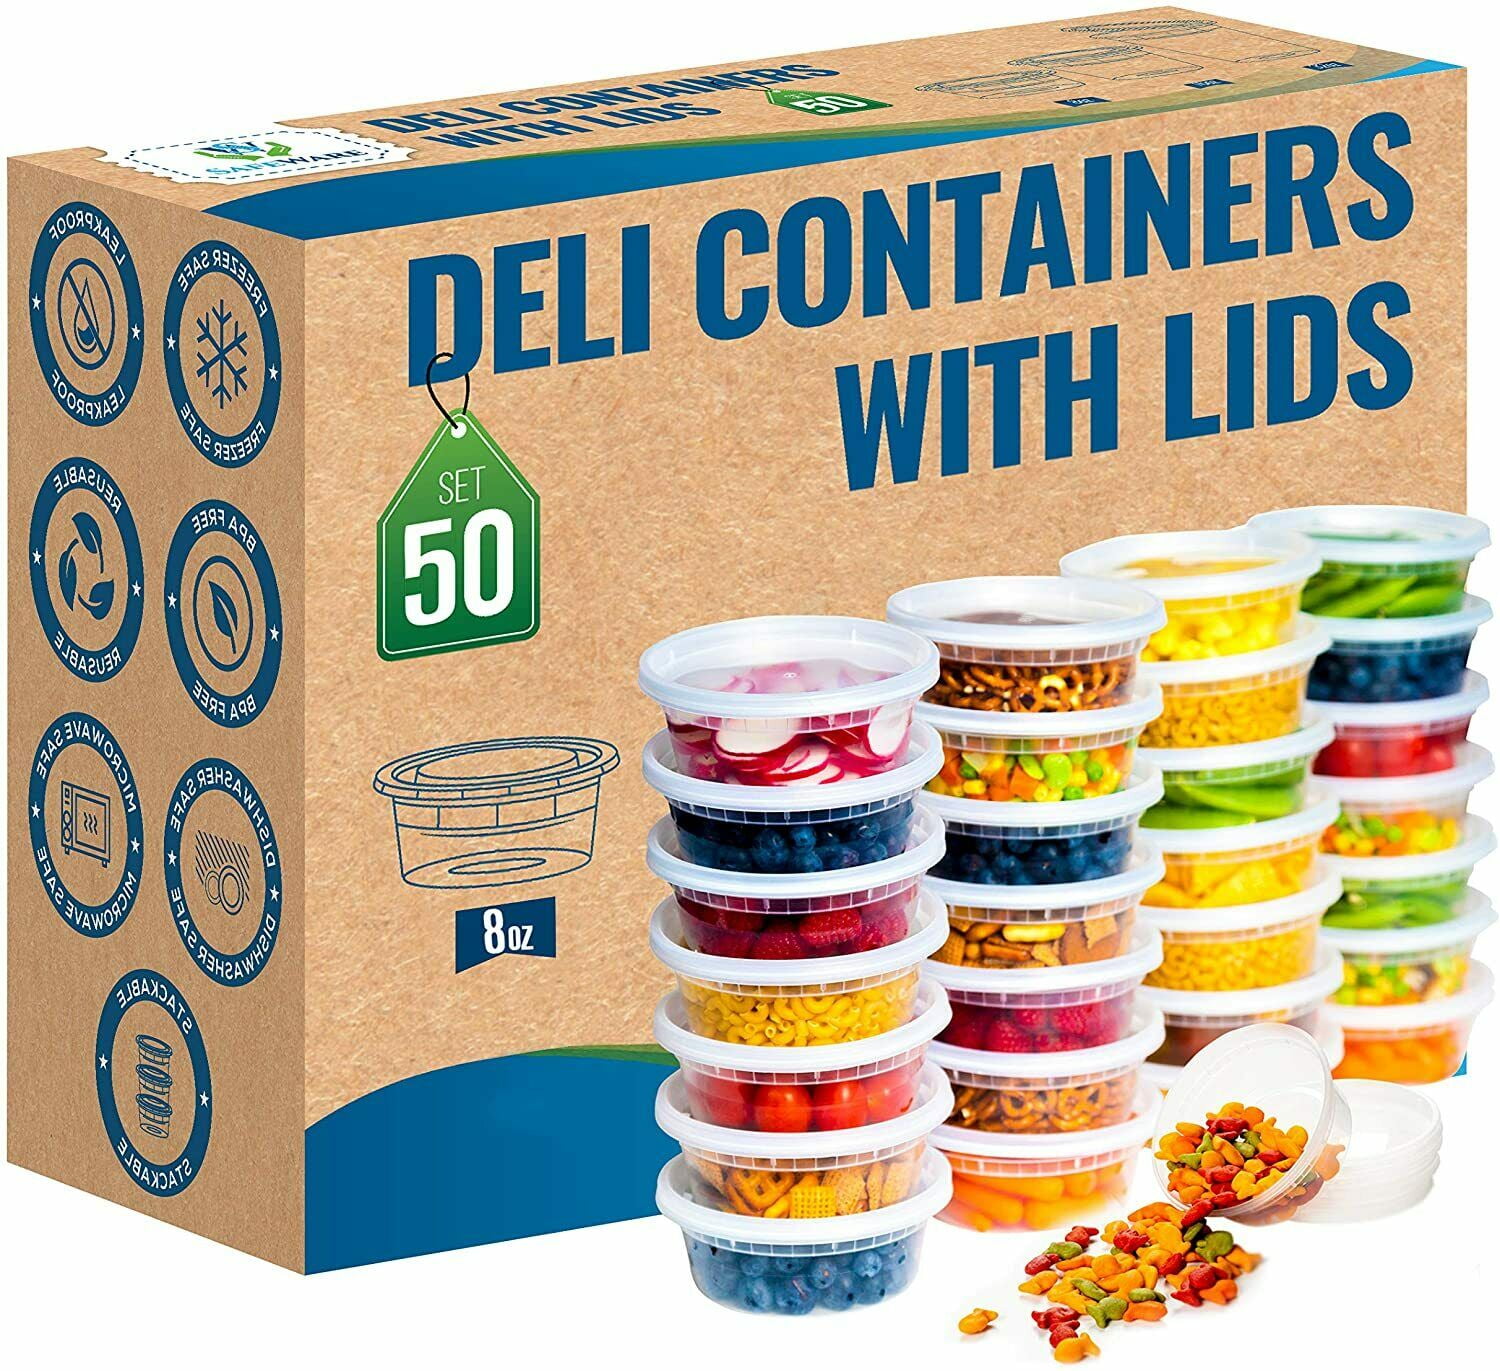 8oz)-Deli Containers with Lids Leakproof - 50 Pack BPA-Free